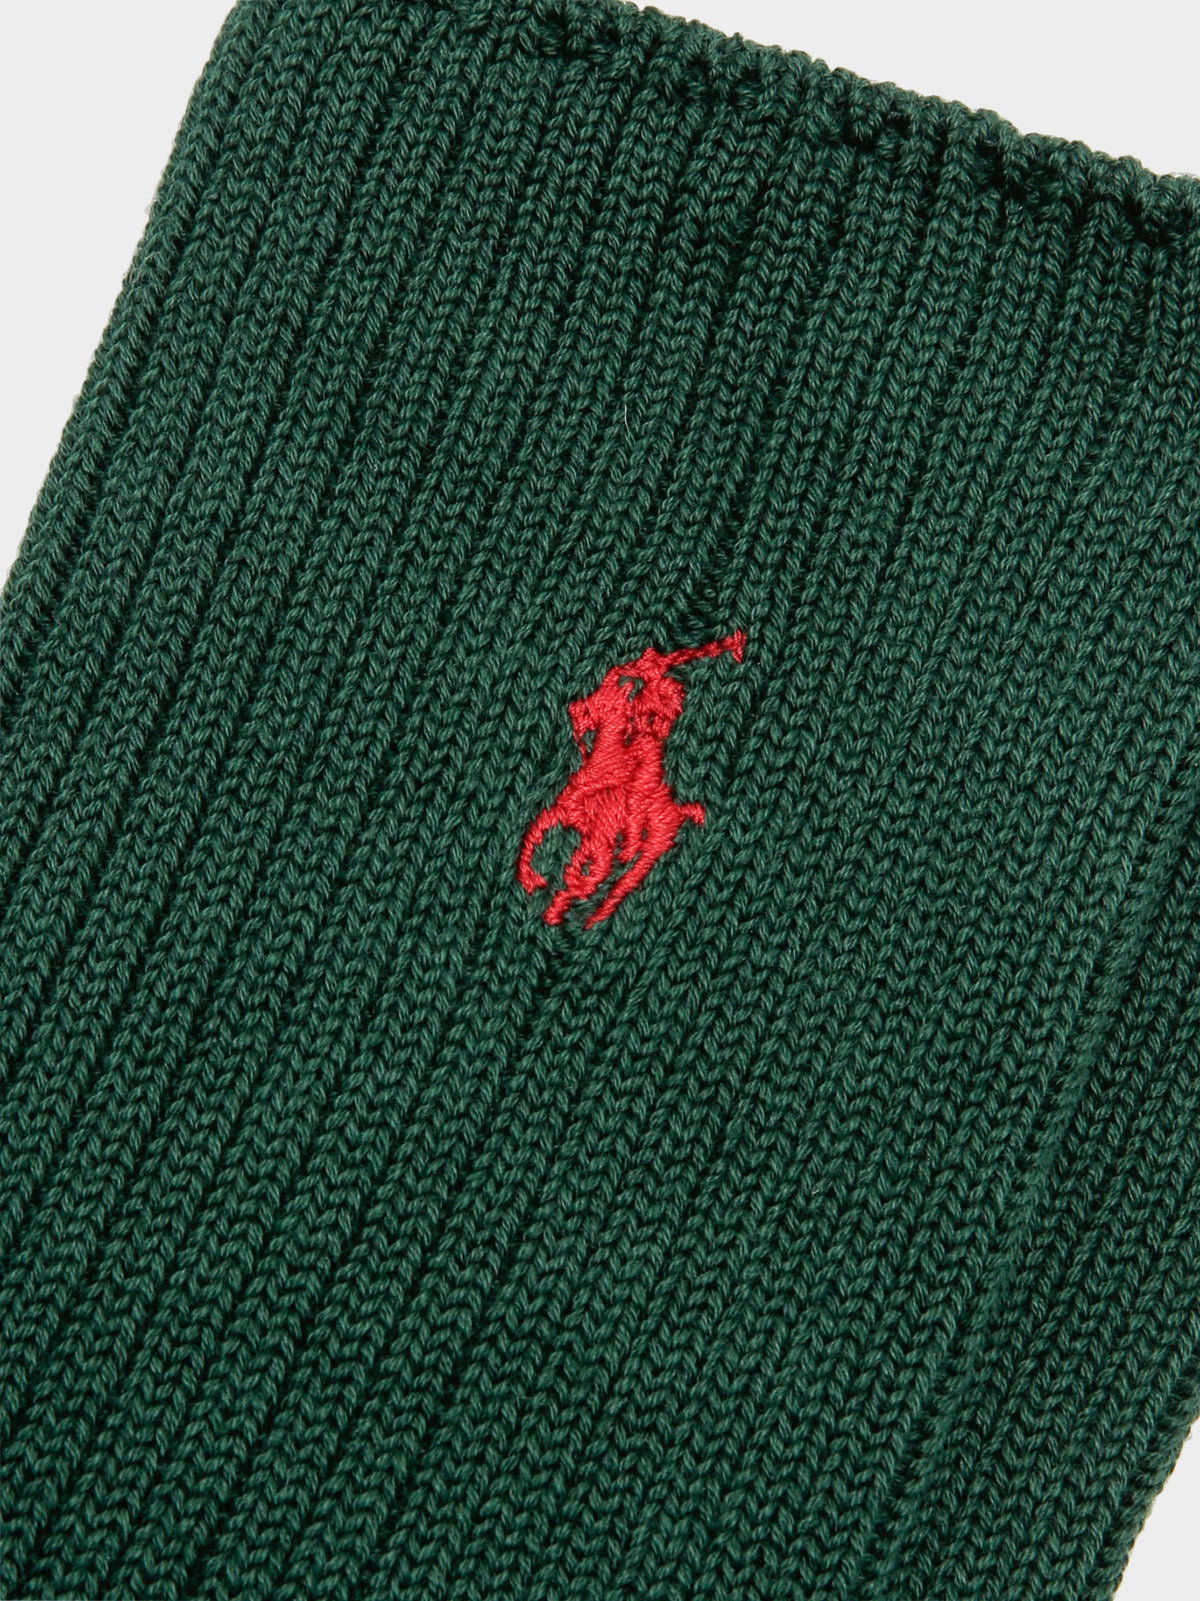 One Pair of Polo Crew Socks in Green